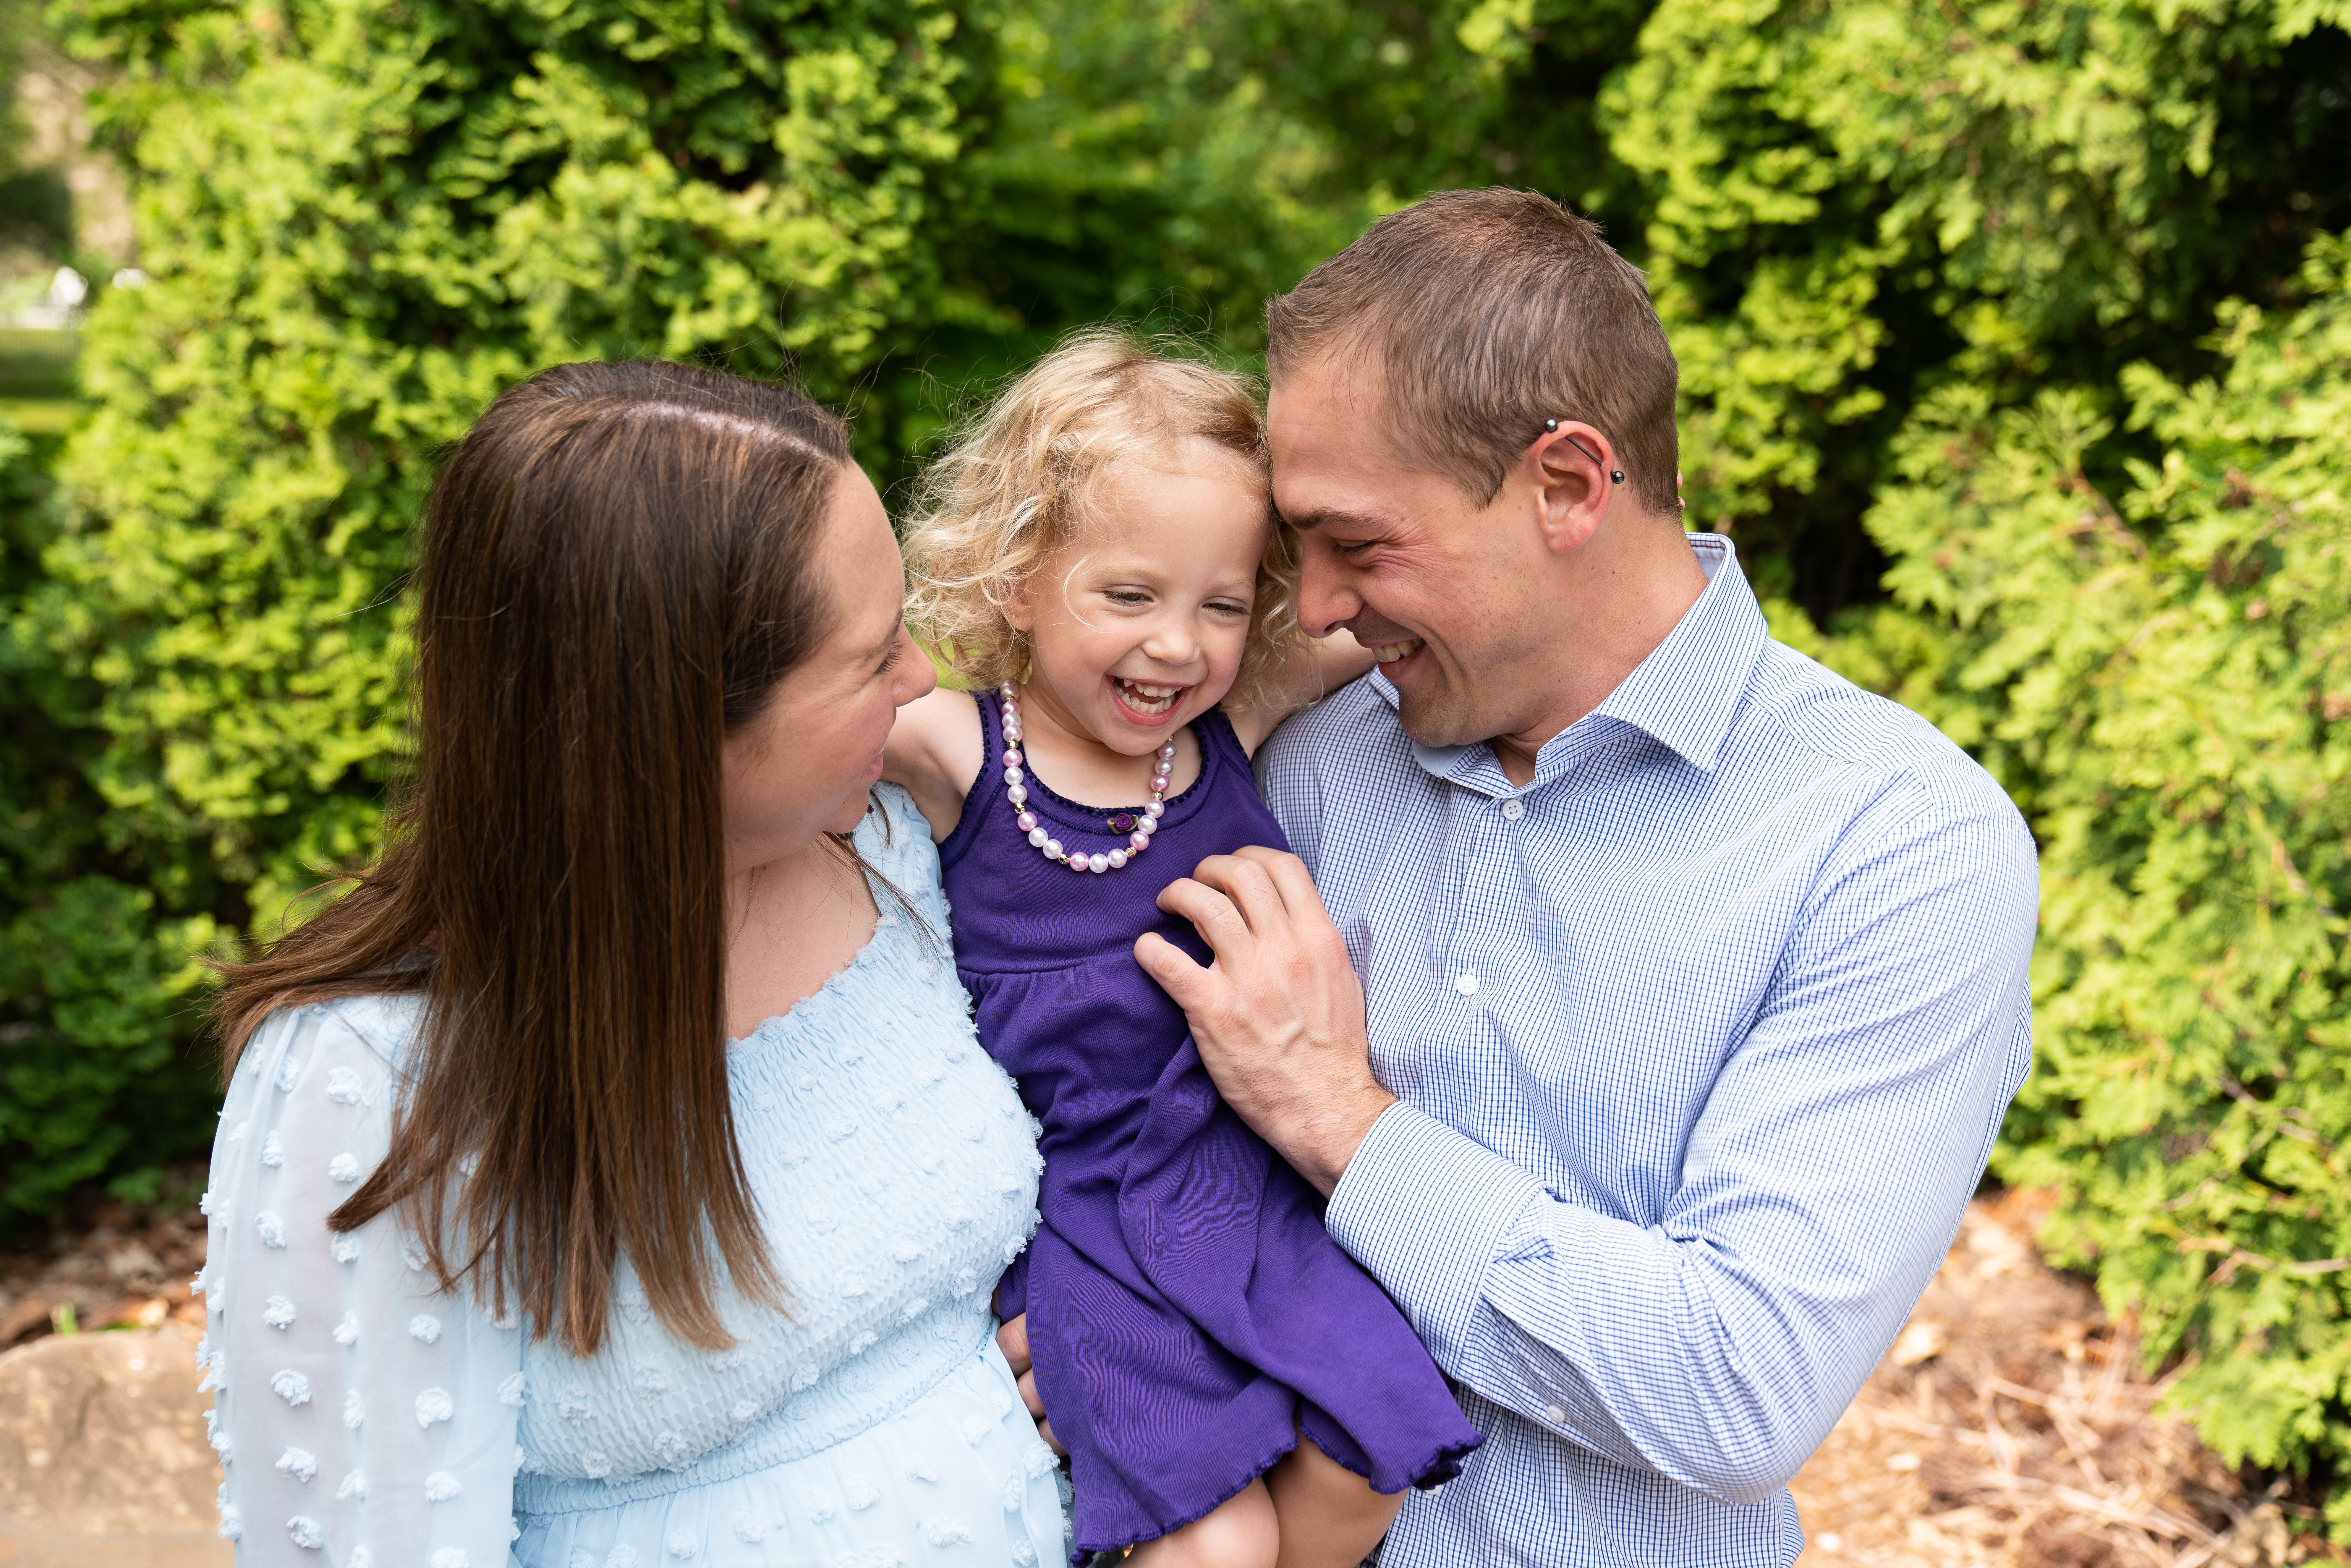 A mom and a dad tickle their little one during their family photoshoot at Arneson Acres Park in Edina, Minnesota.